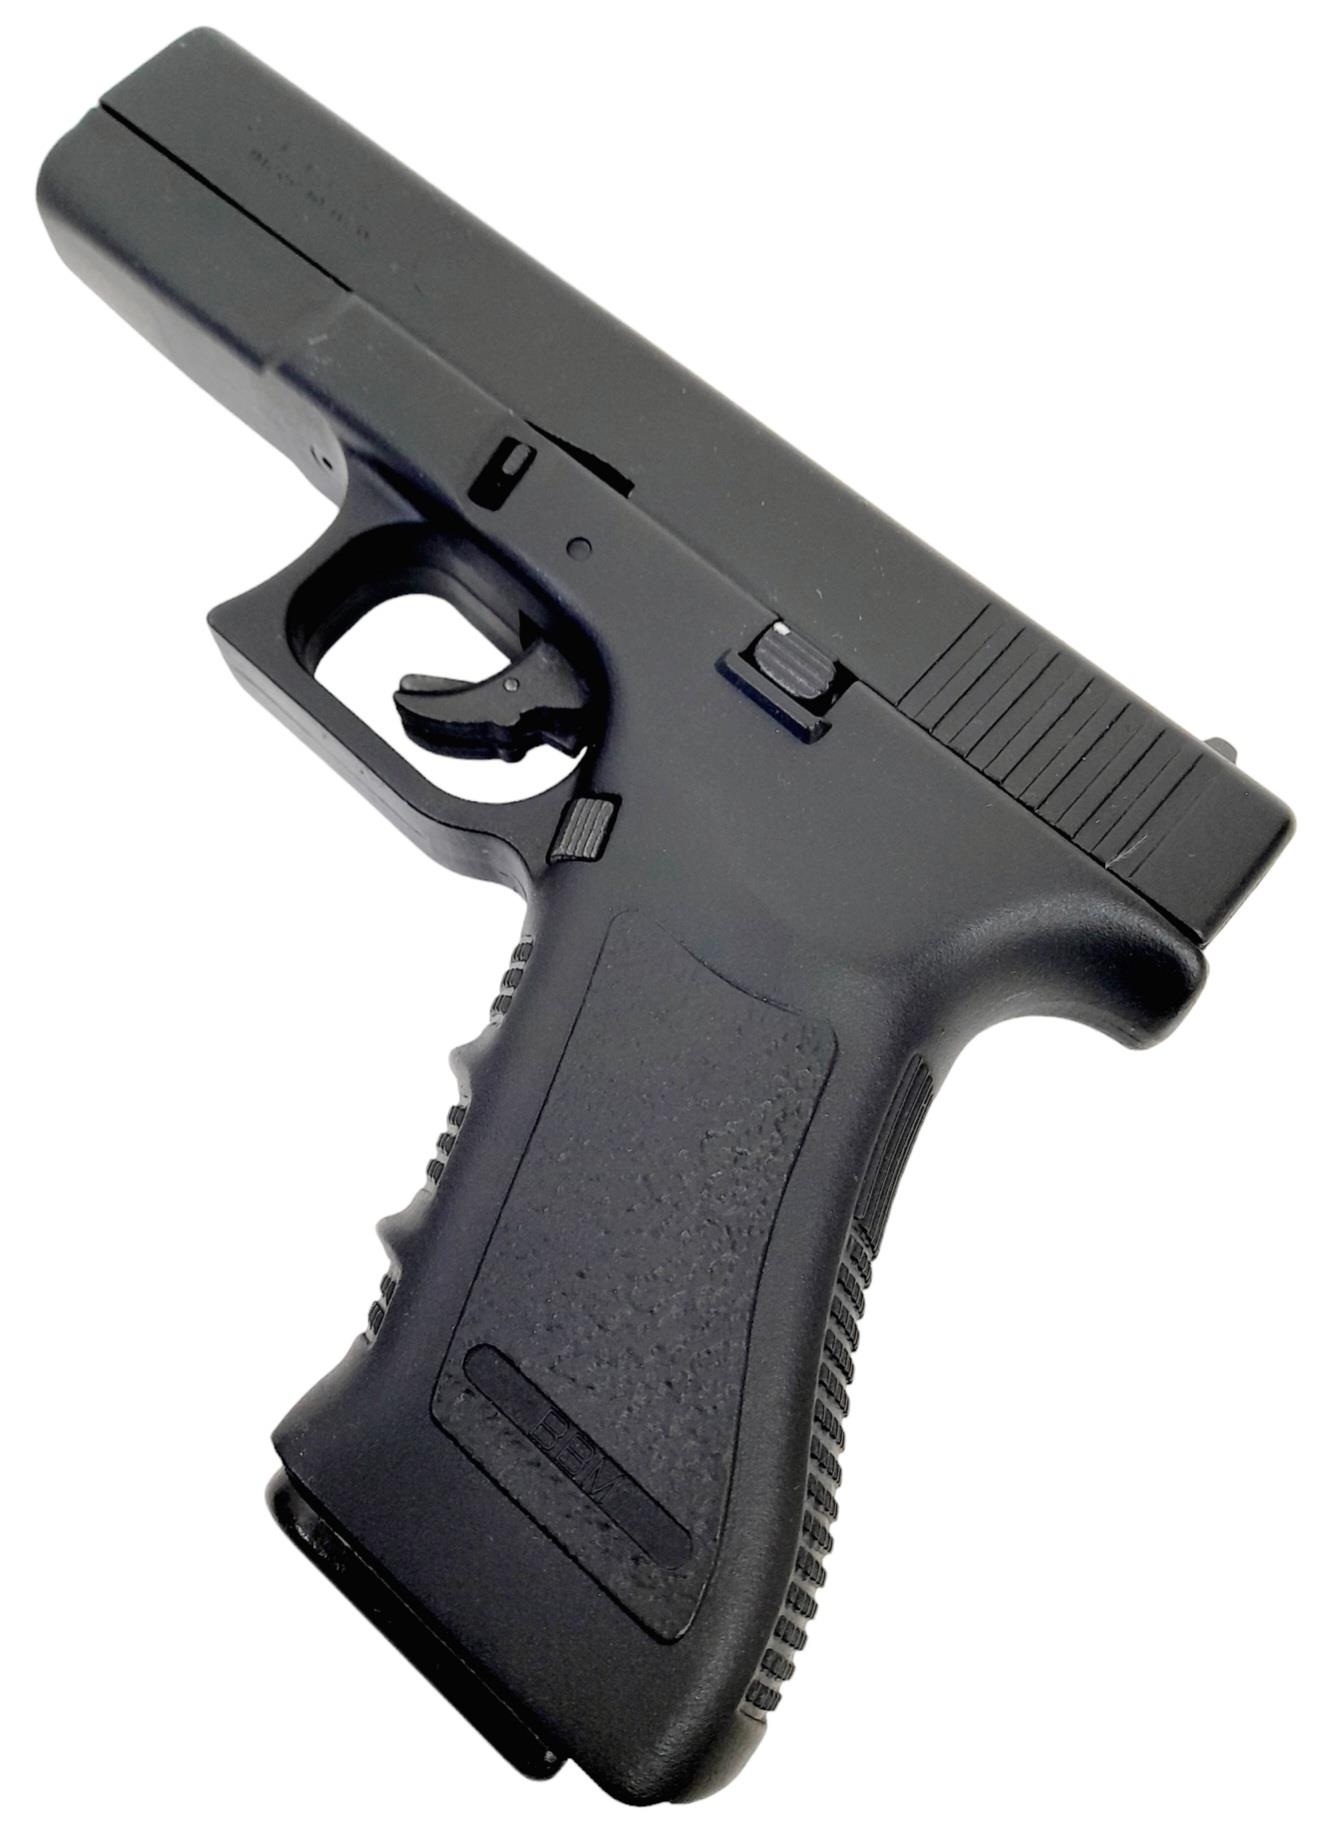 A Glock Gap 8mm Top Vented Blank Firing Pistol. Over 18 only. UK sales only. Blank guns should - Image 3 of 5